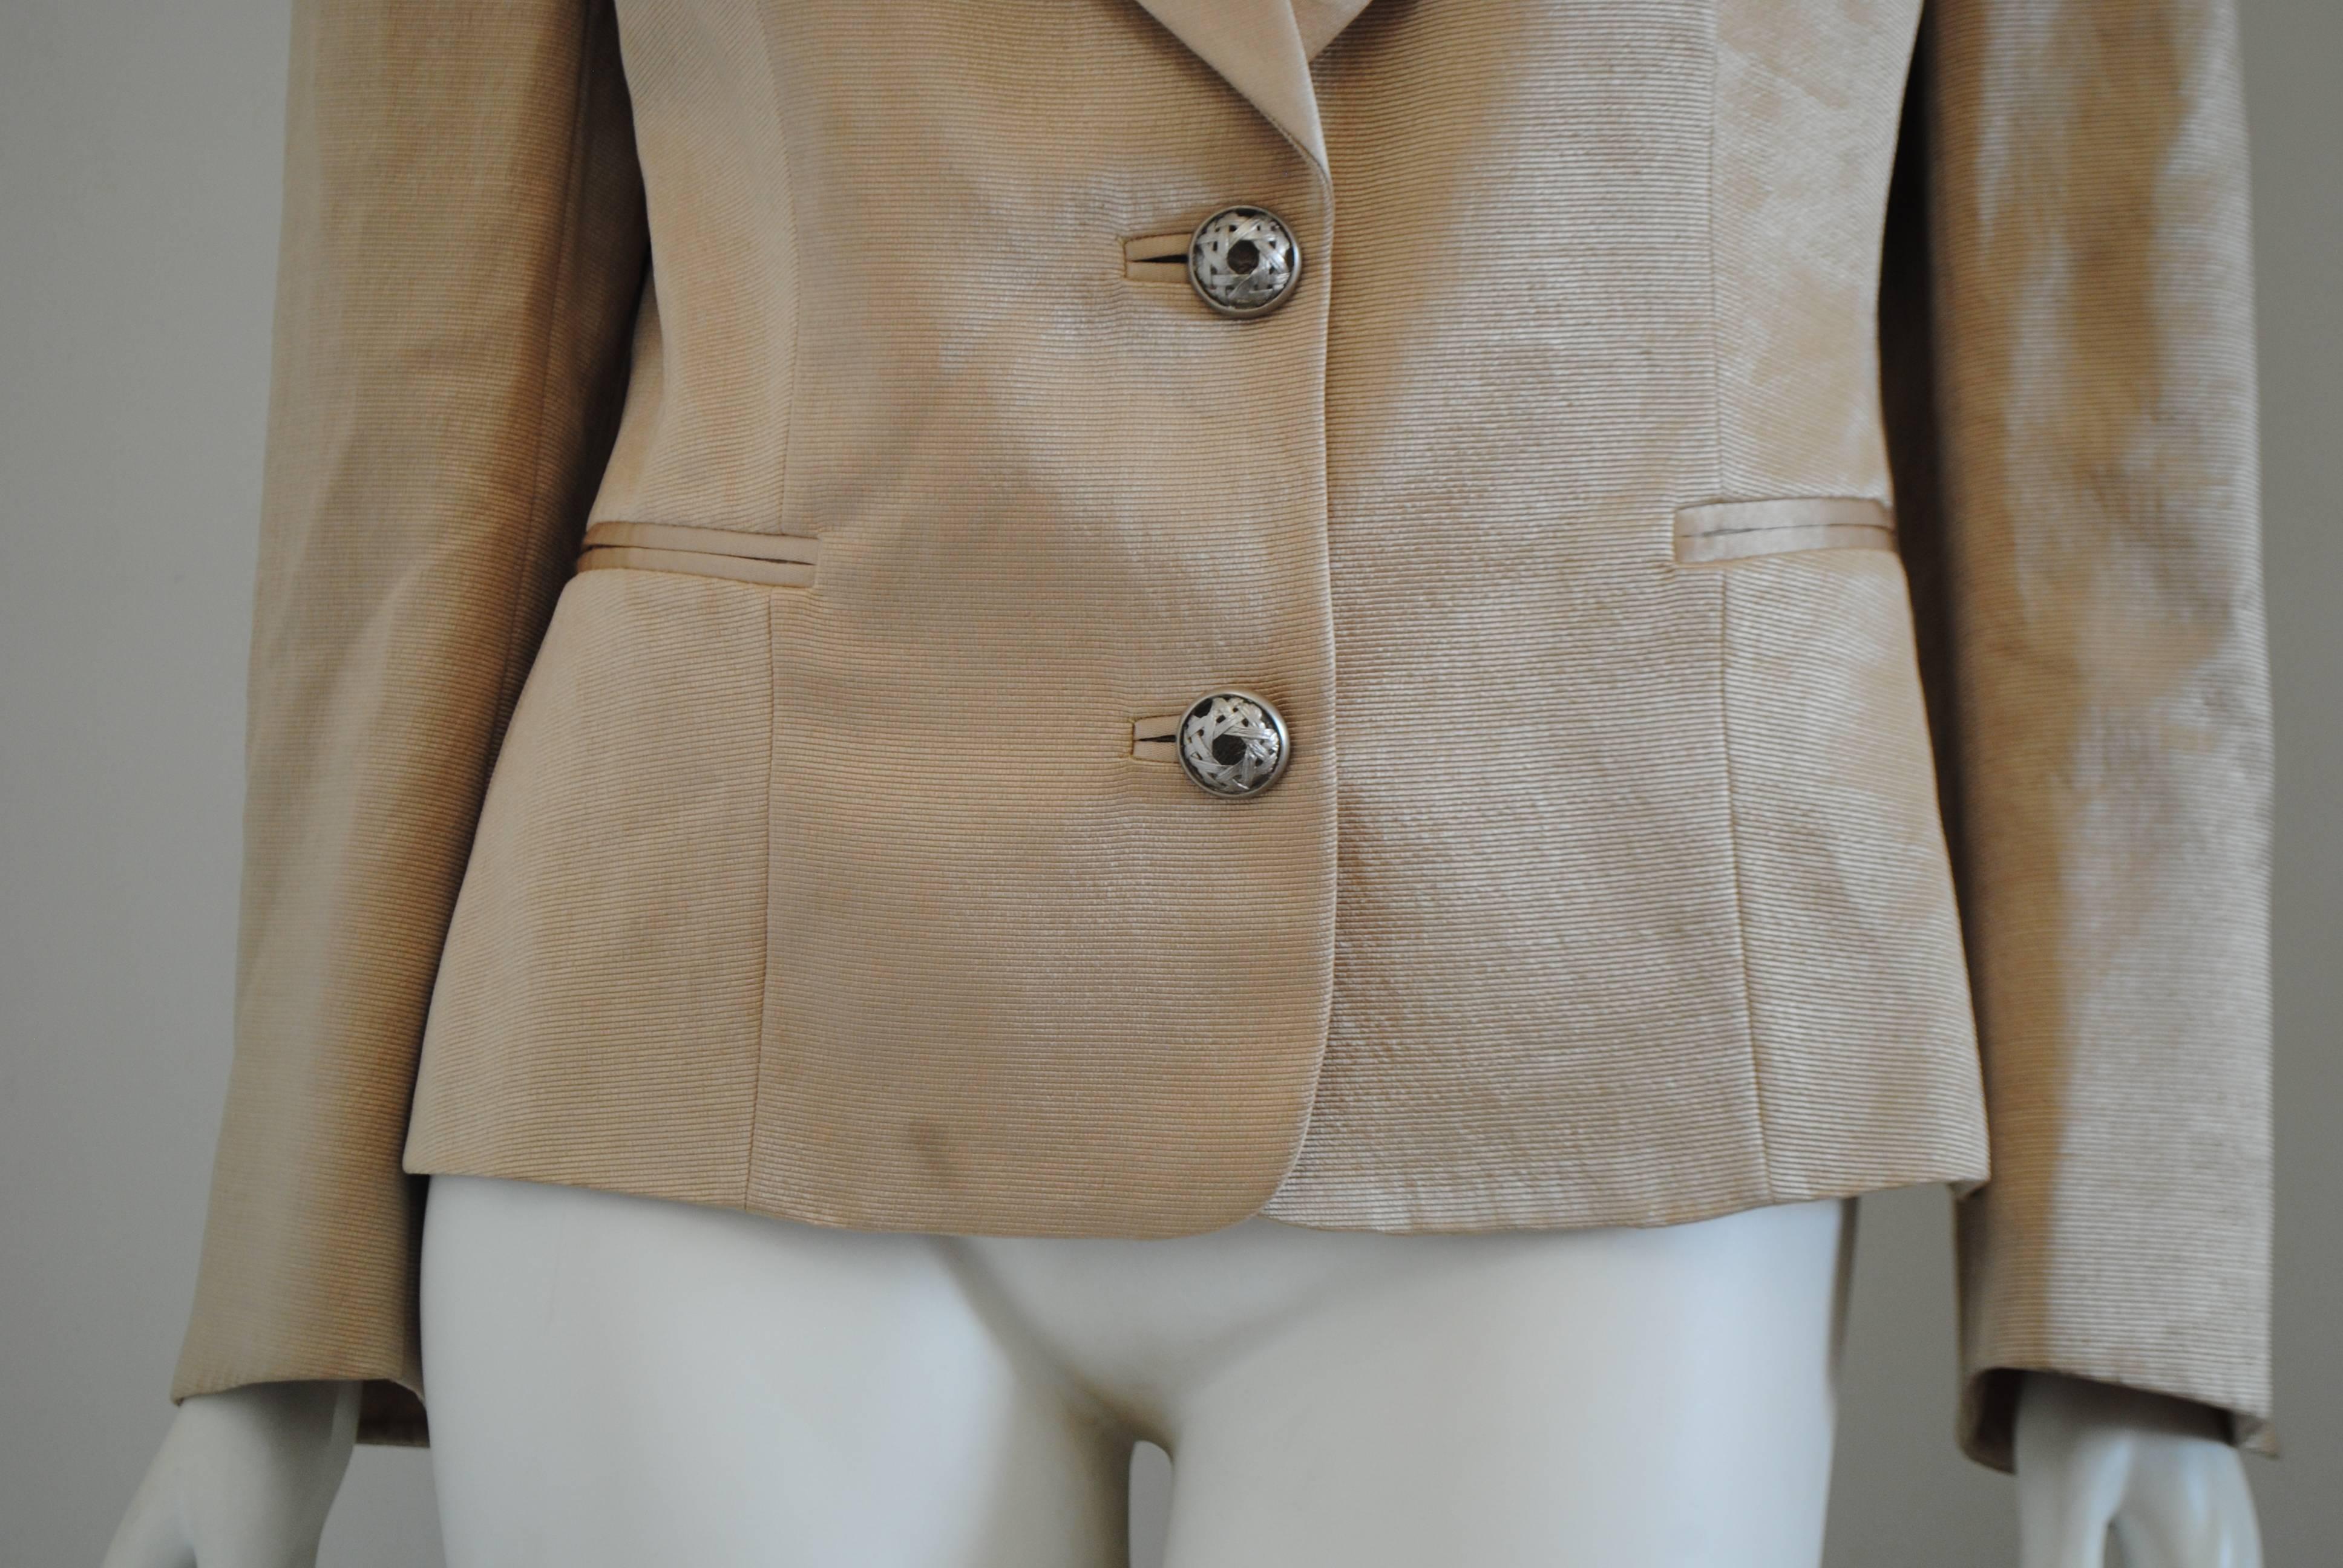 Forma Zero by Gff Beije Jacket

Totally made in italy in italian size range 46

Composition: Acetate and wool